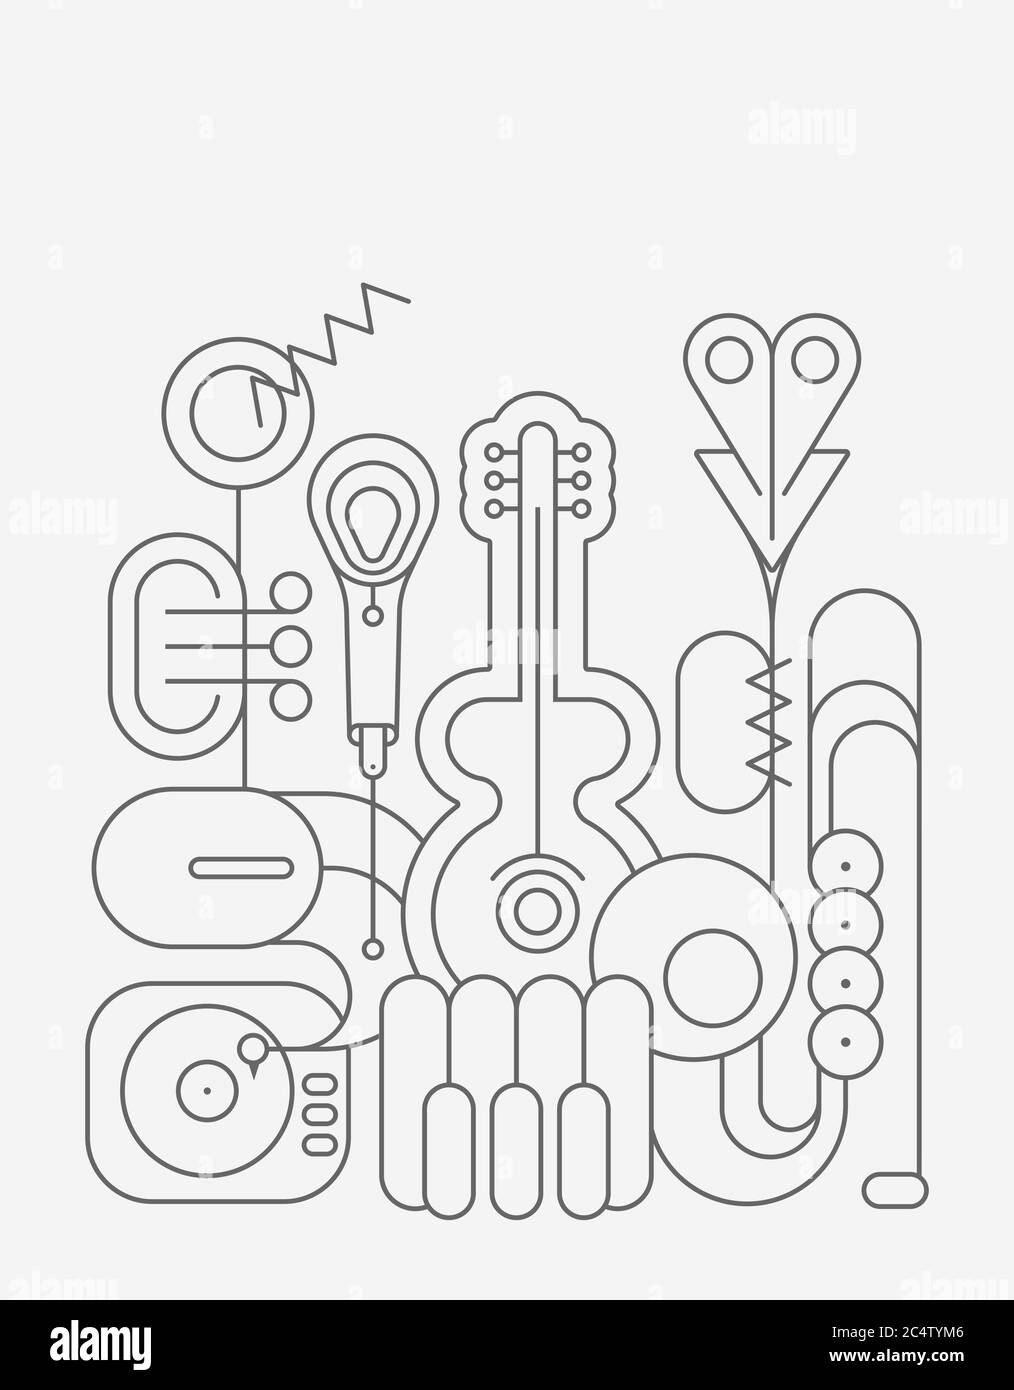 Dark grey line art silhouettes isolated on a light background Music Instruments Design vector illustration. Guitar, saxophone, piano keyboard, trumpet Stock Vector